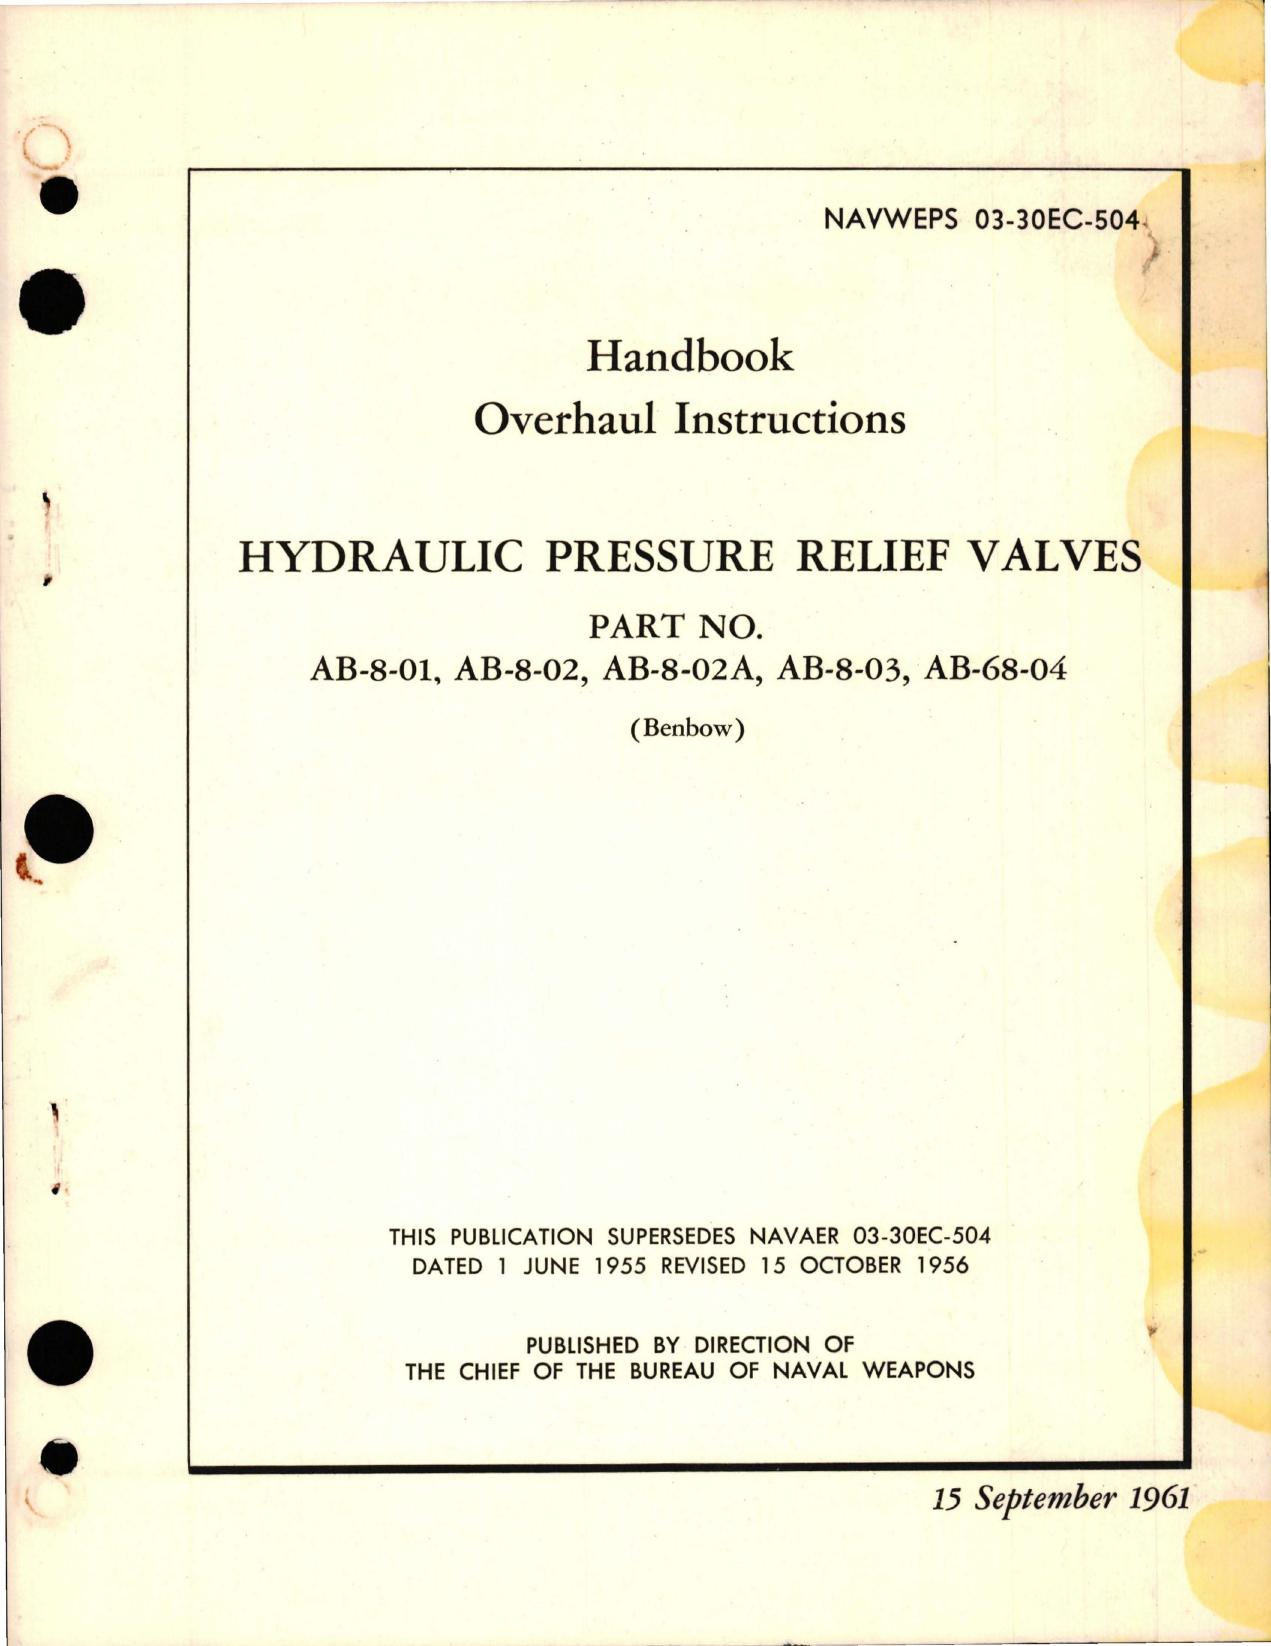 Sample page 1 from AirCorps Library document: Overhaul Instructions for Hydraulic Pressure Relief Valves - Parts AB-8-01, AB-8-02, AB-8-02A, AB-8-03, and AB-68-04 